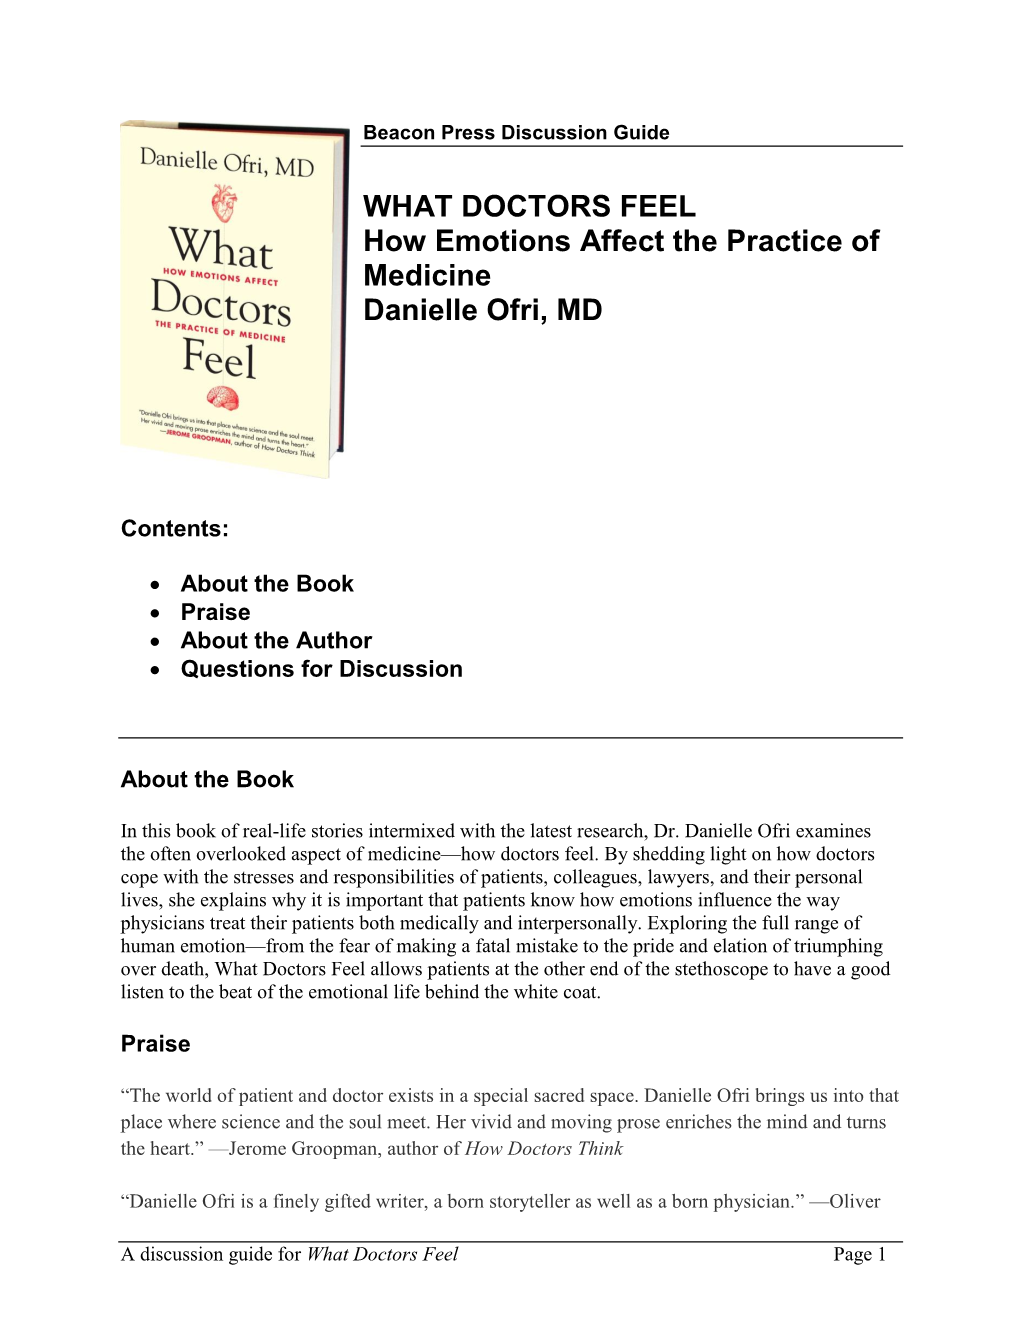 WHAT DOCTORS FEEL How Emotions Affect the Practice of Medicine Danielle Ofri, MD